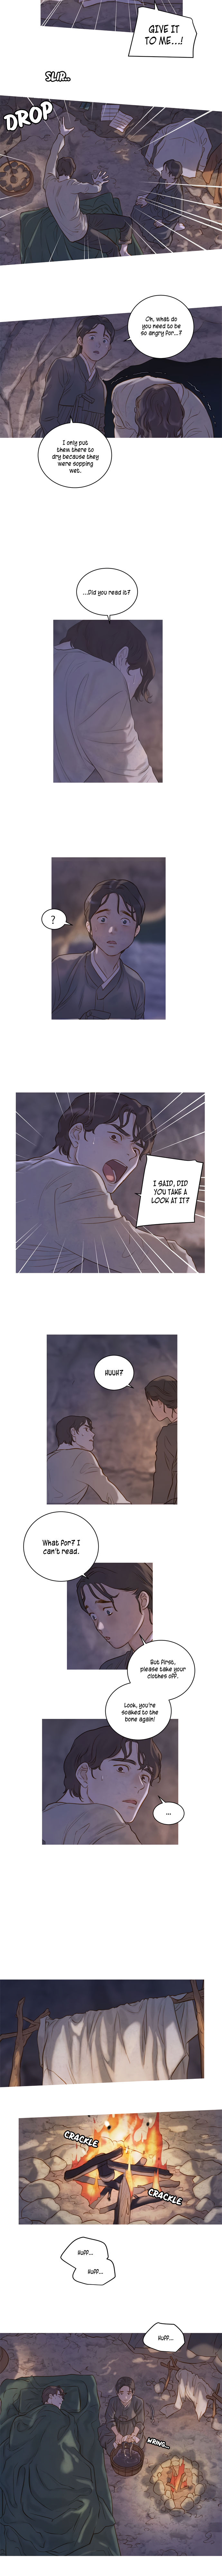 The Whale Star - The Gyeongseong Mermaid - Chapter 3 Page 3